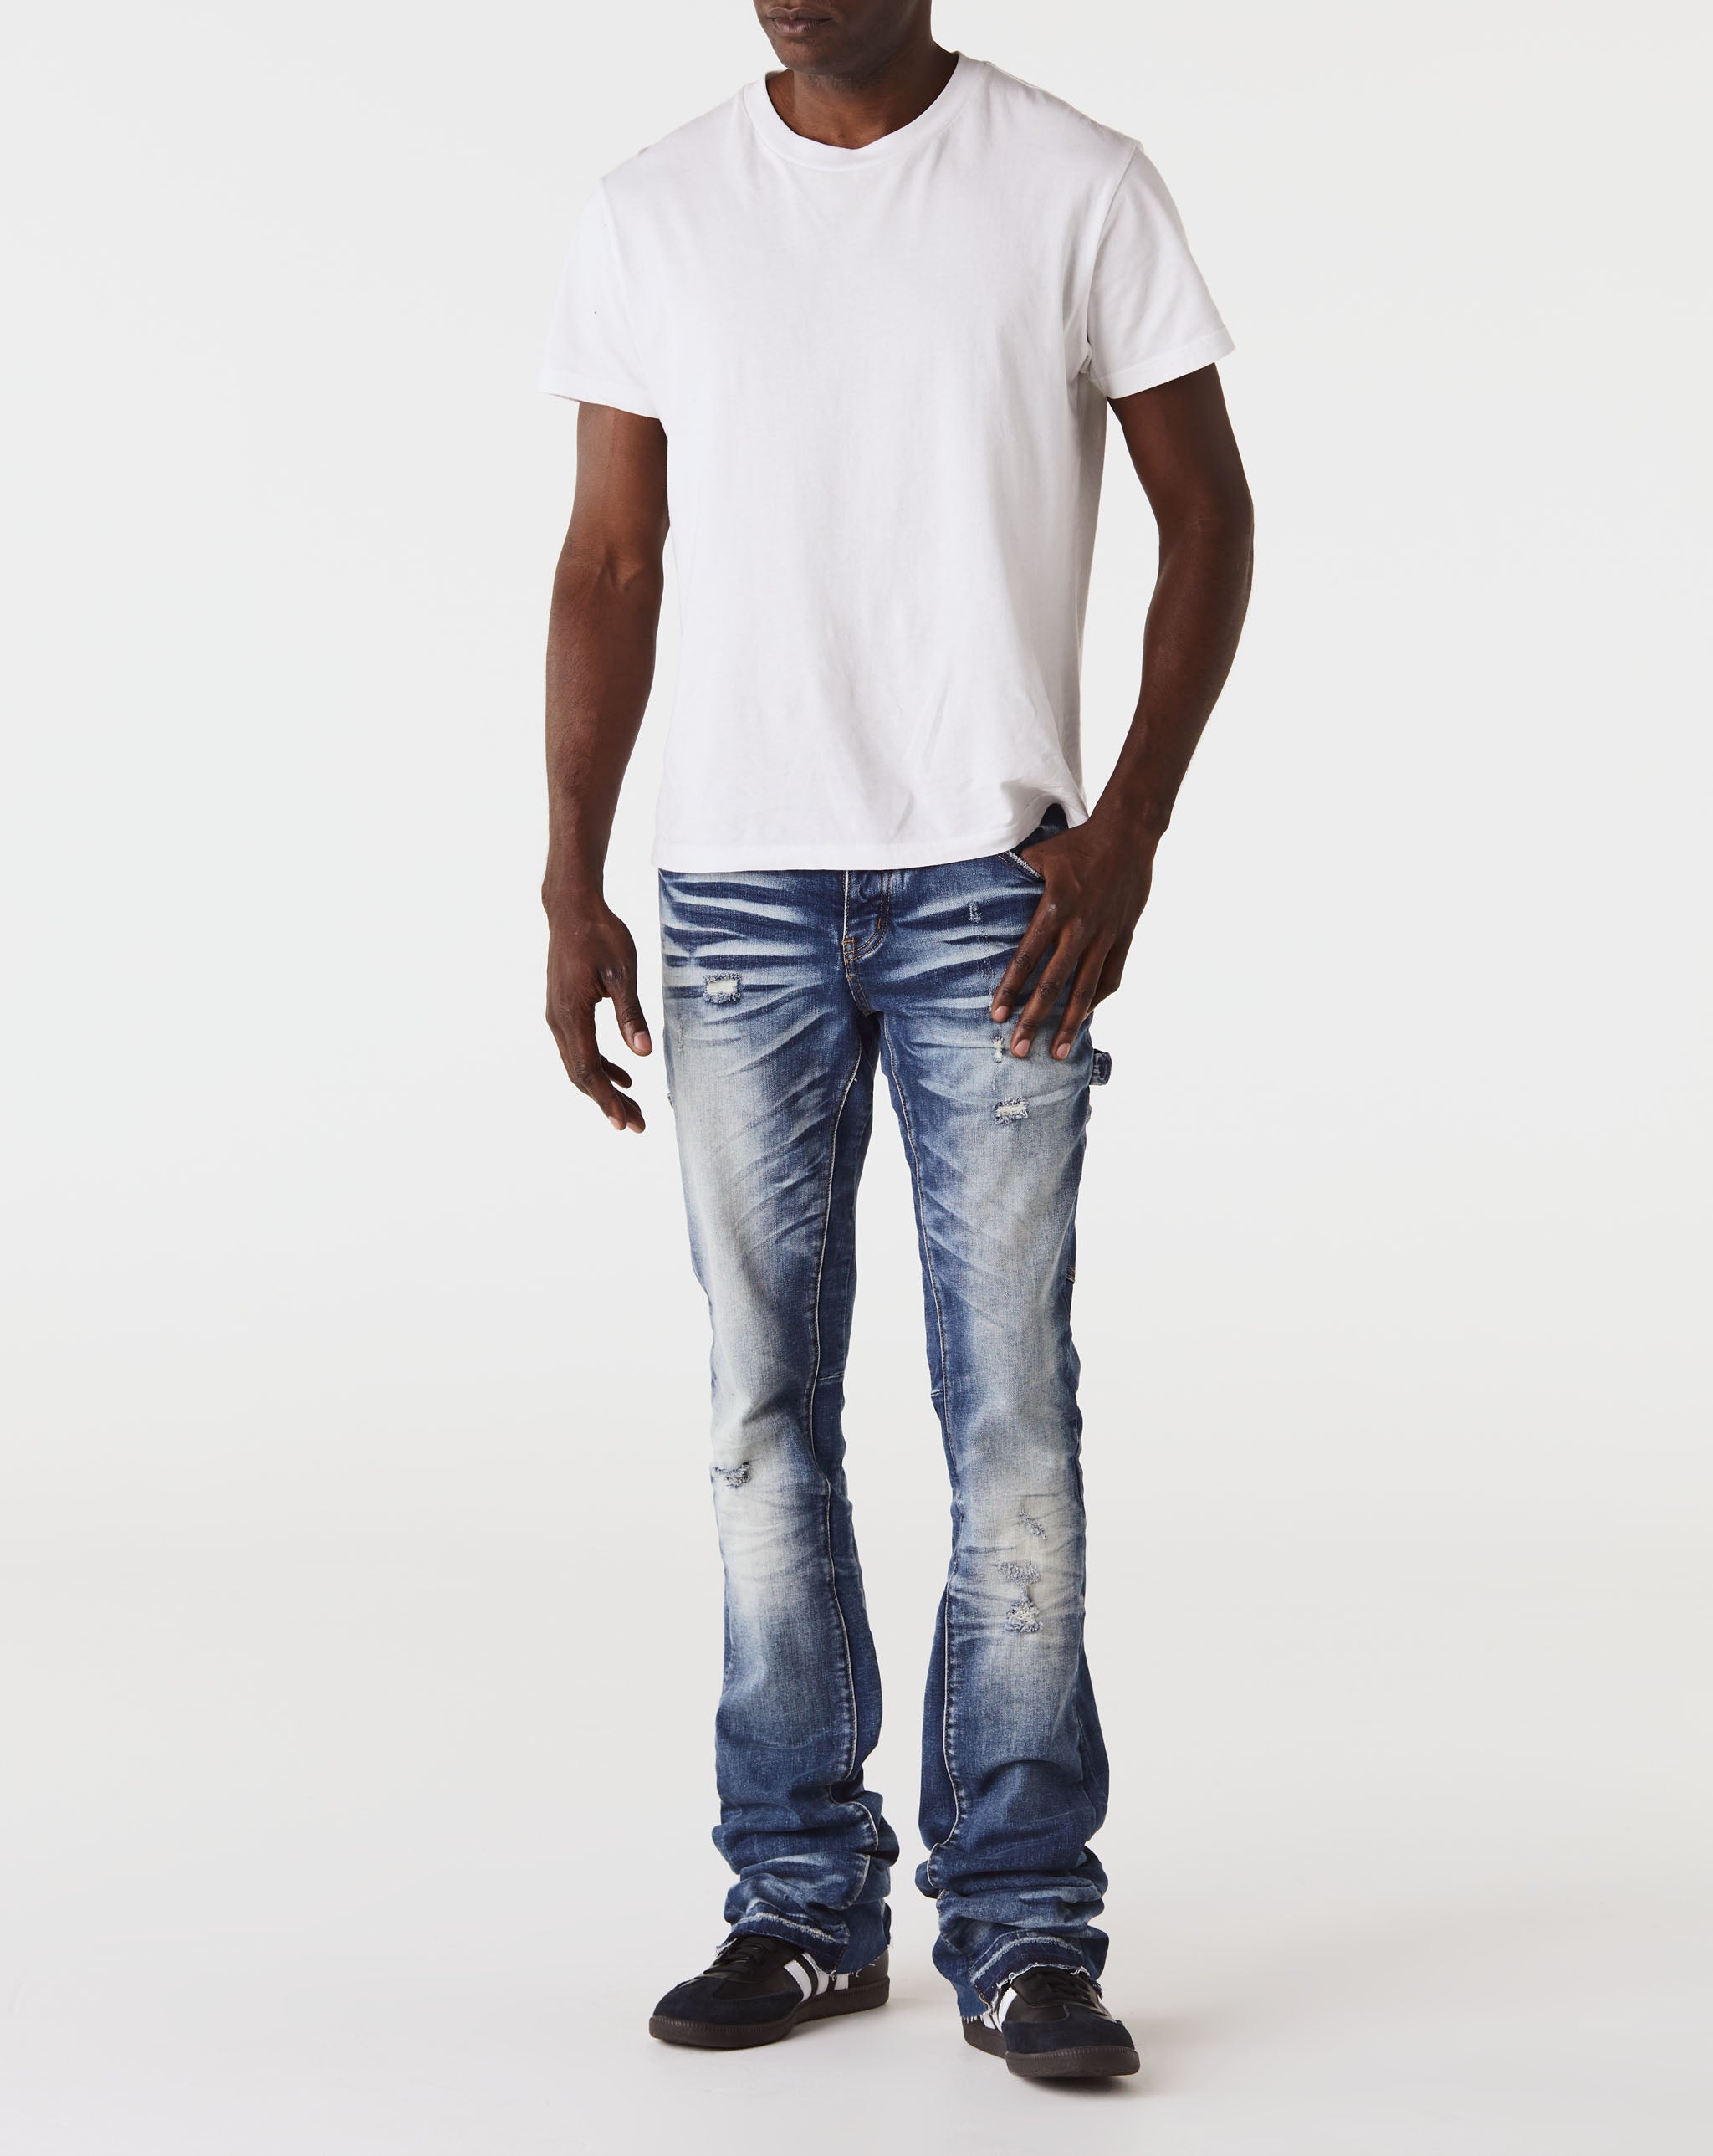 VALABASAS Classified Super Stacked Denim - Rule of Next Apparel